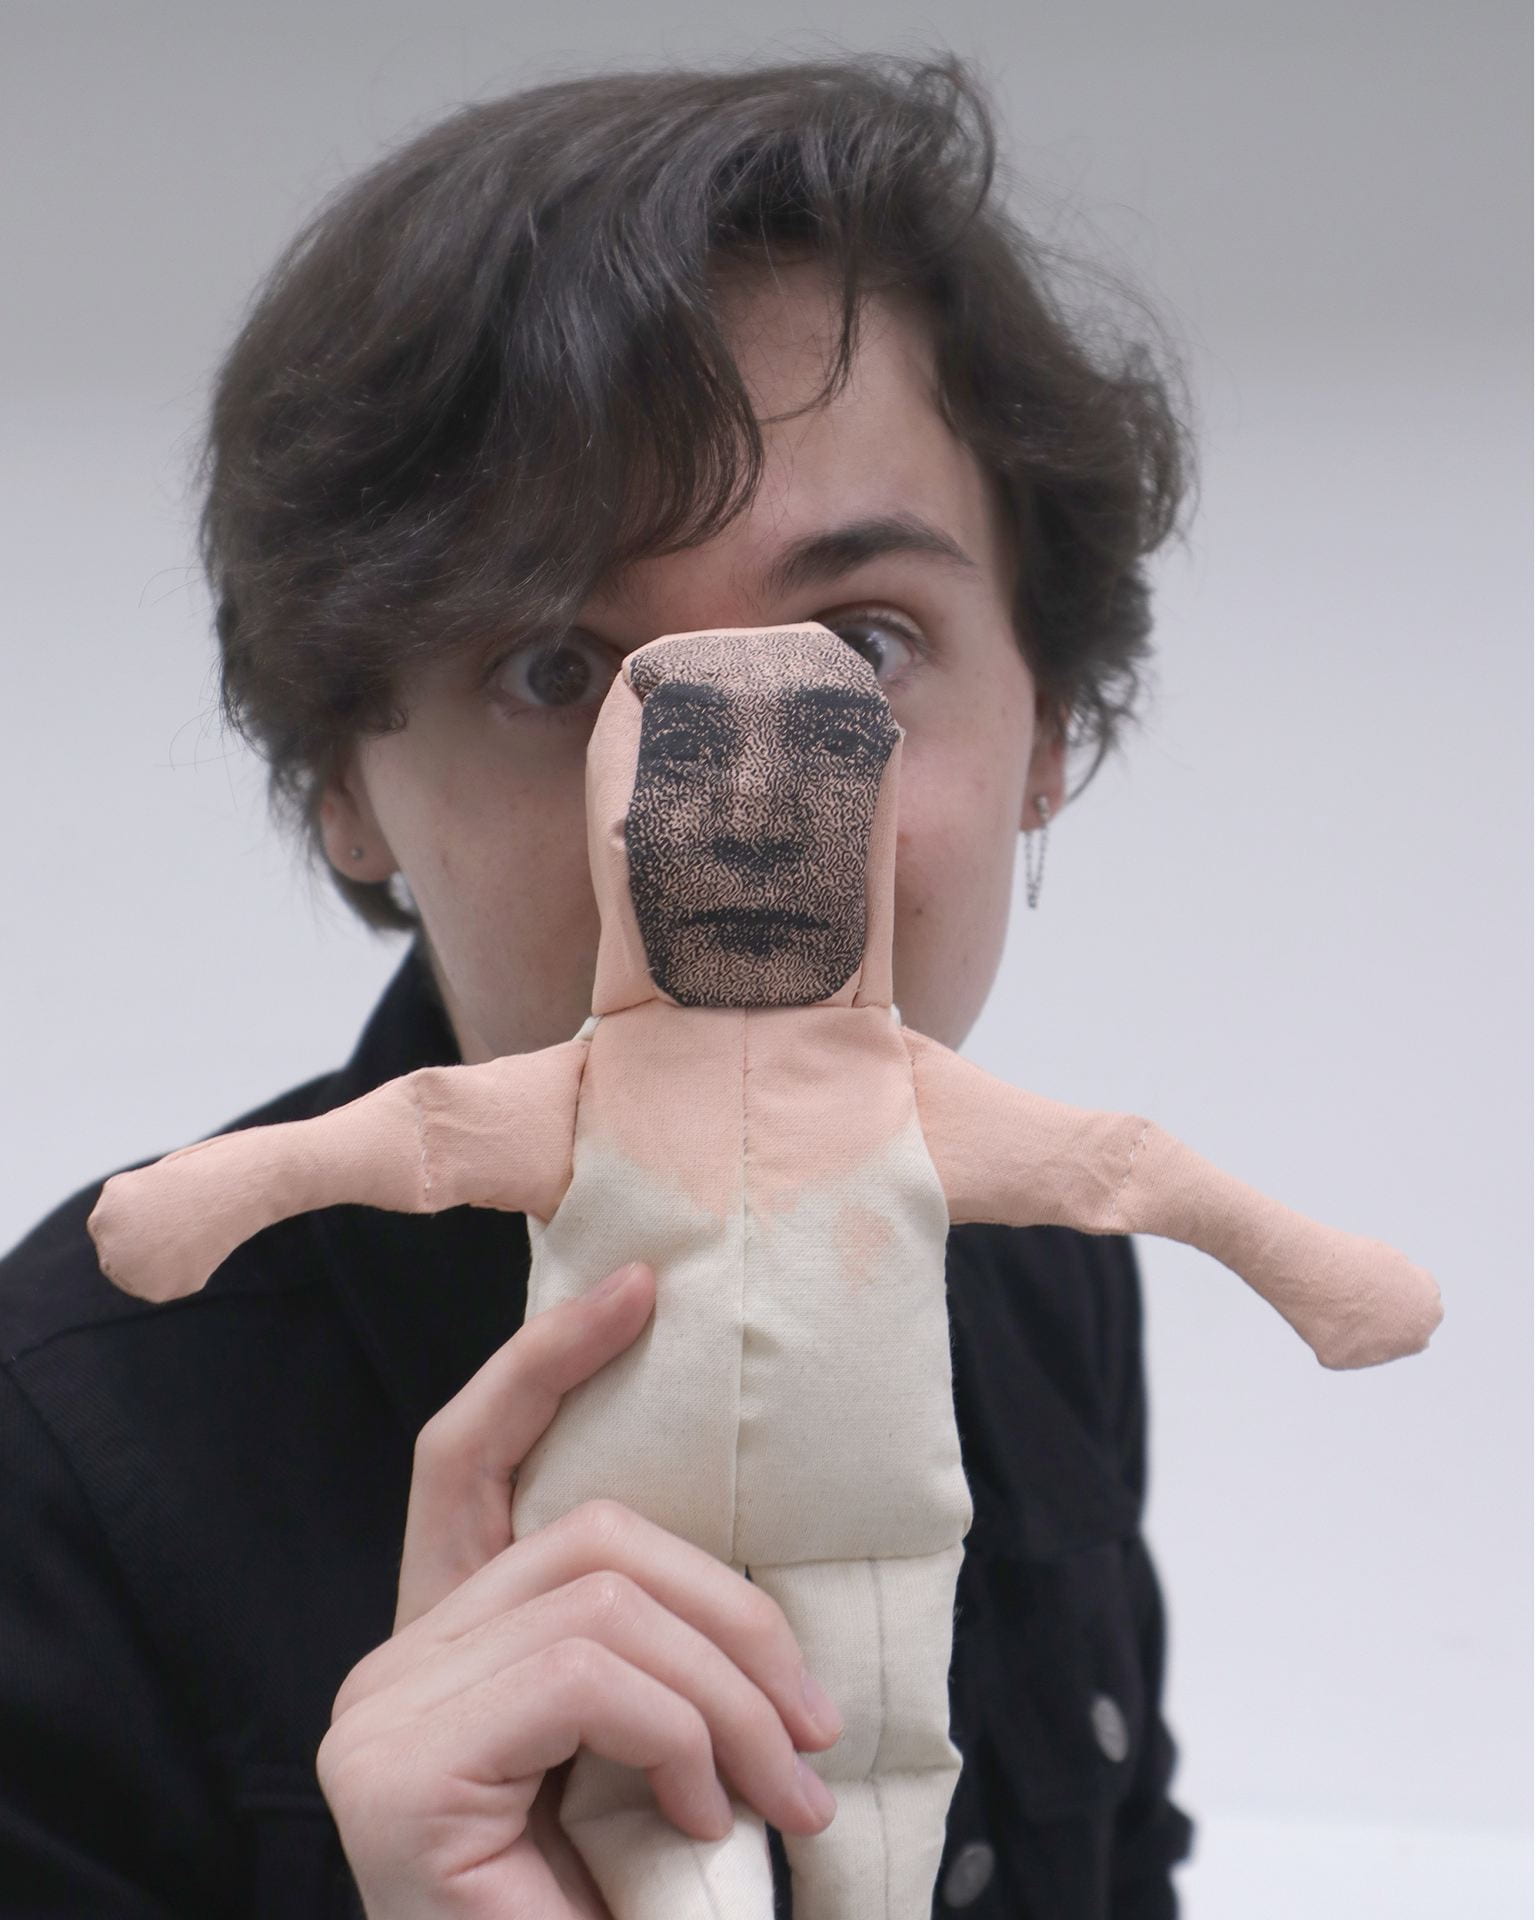 The artist pictured with the first of many dolls.